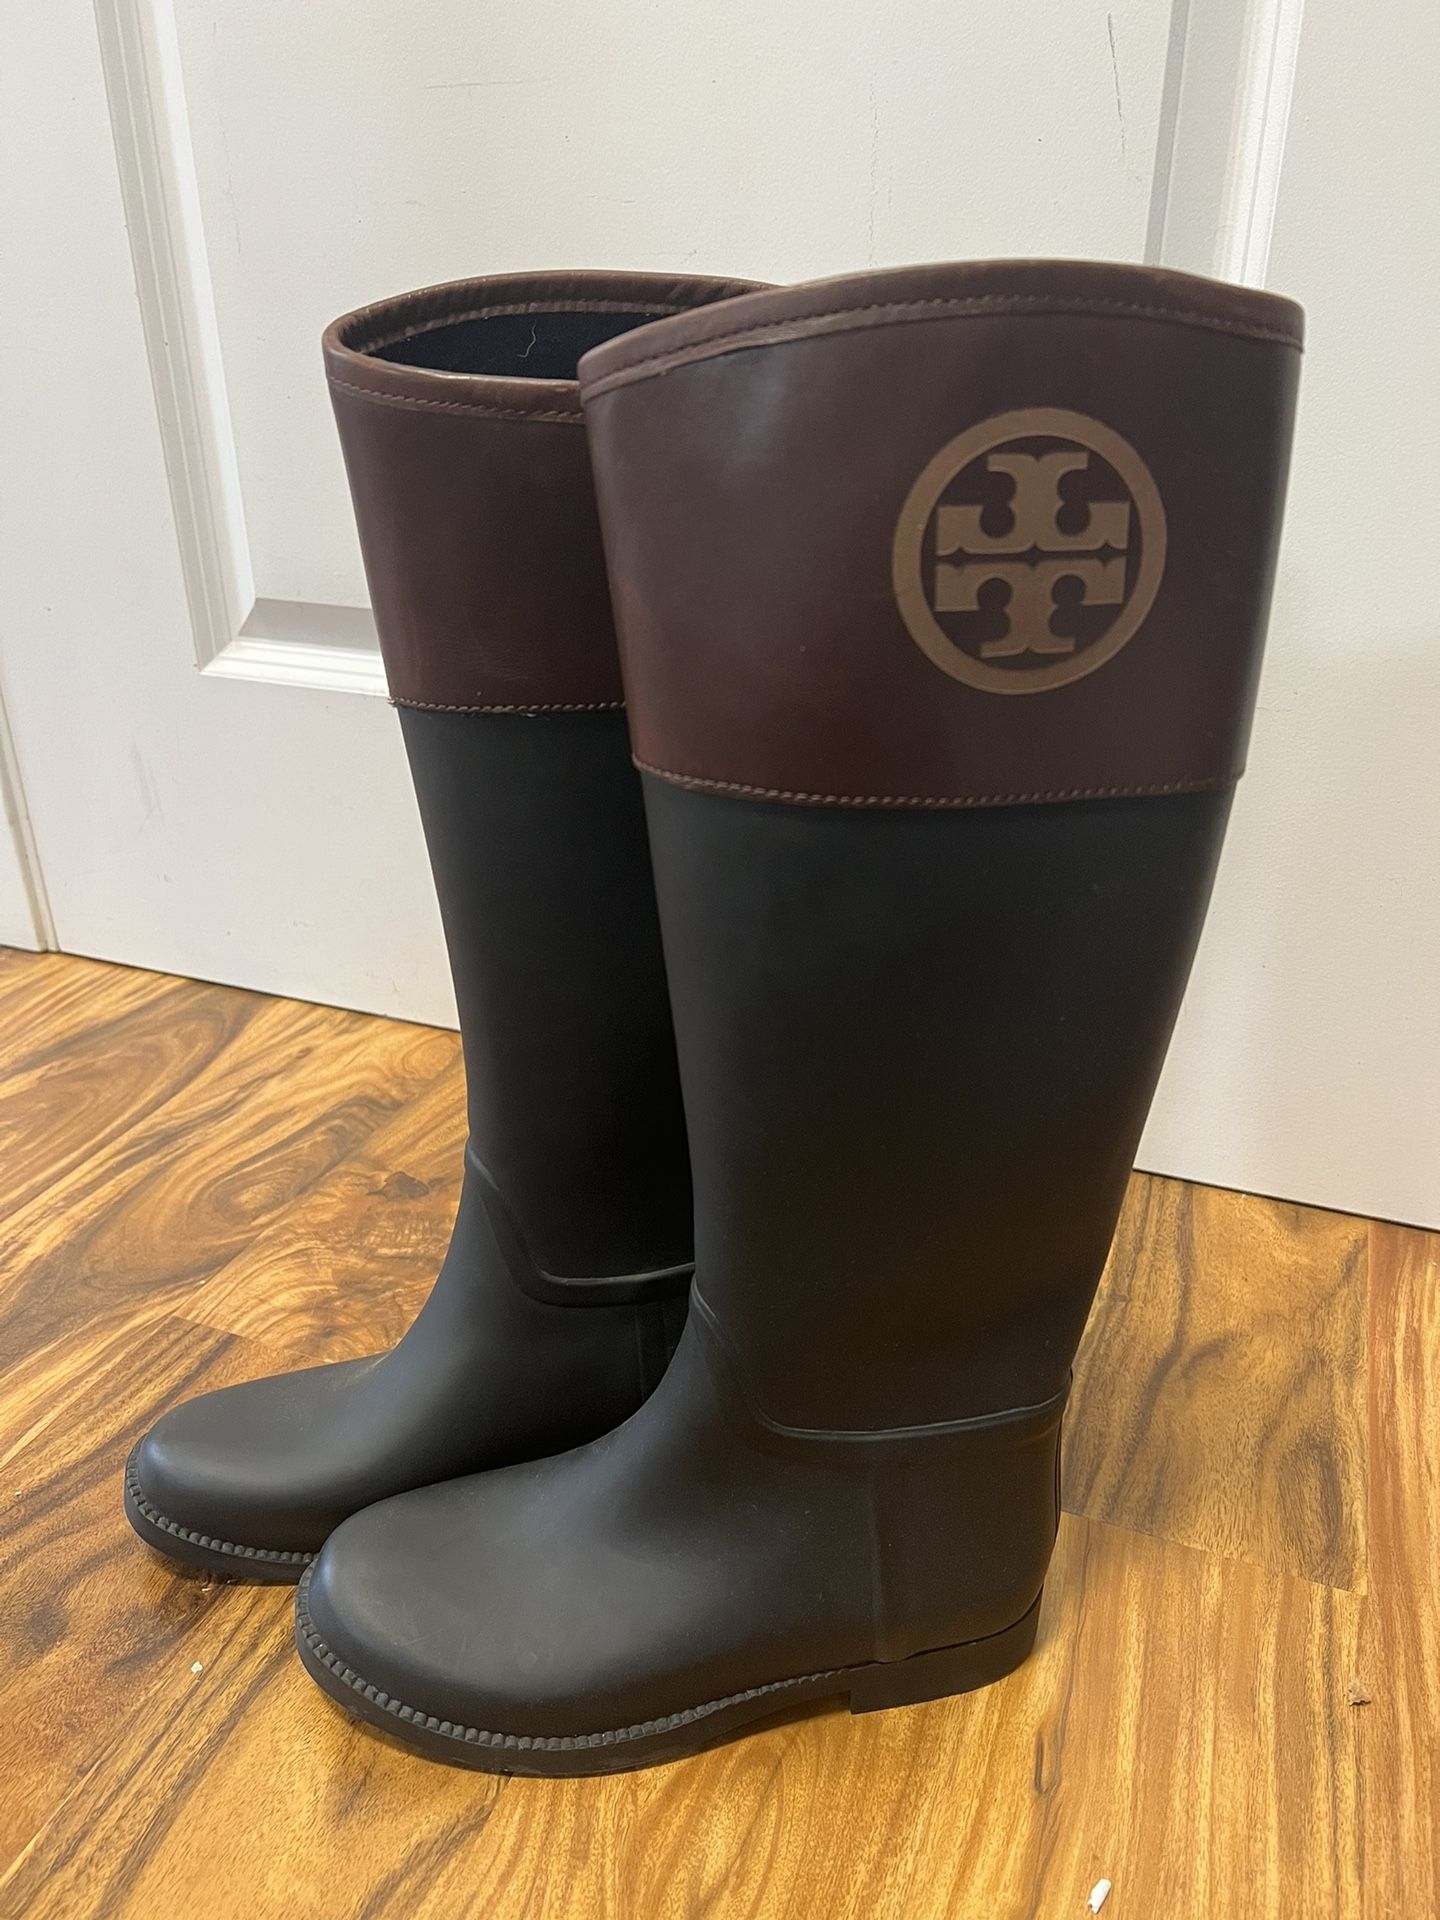 Tory Burch Rubber Boots Size 7 